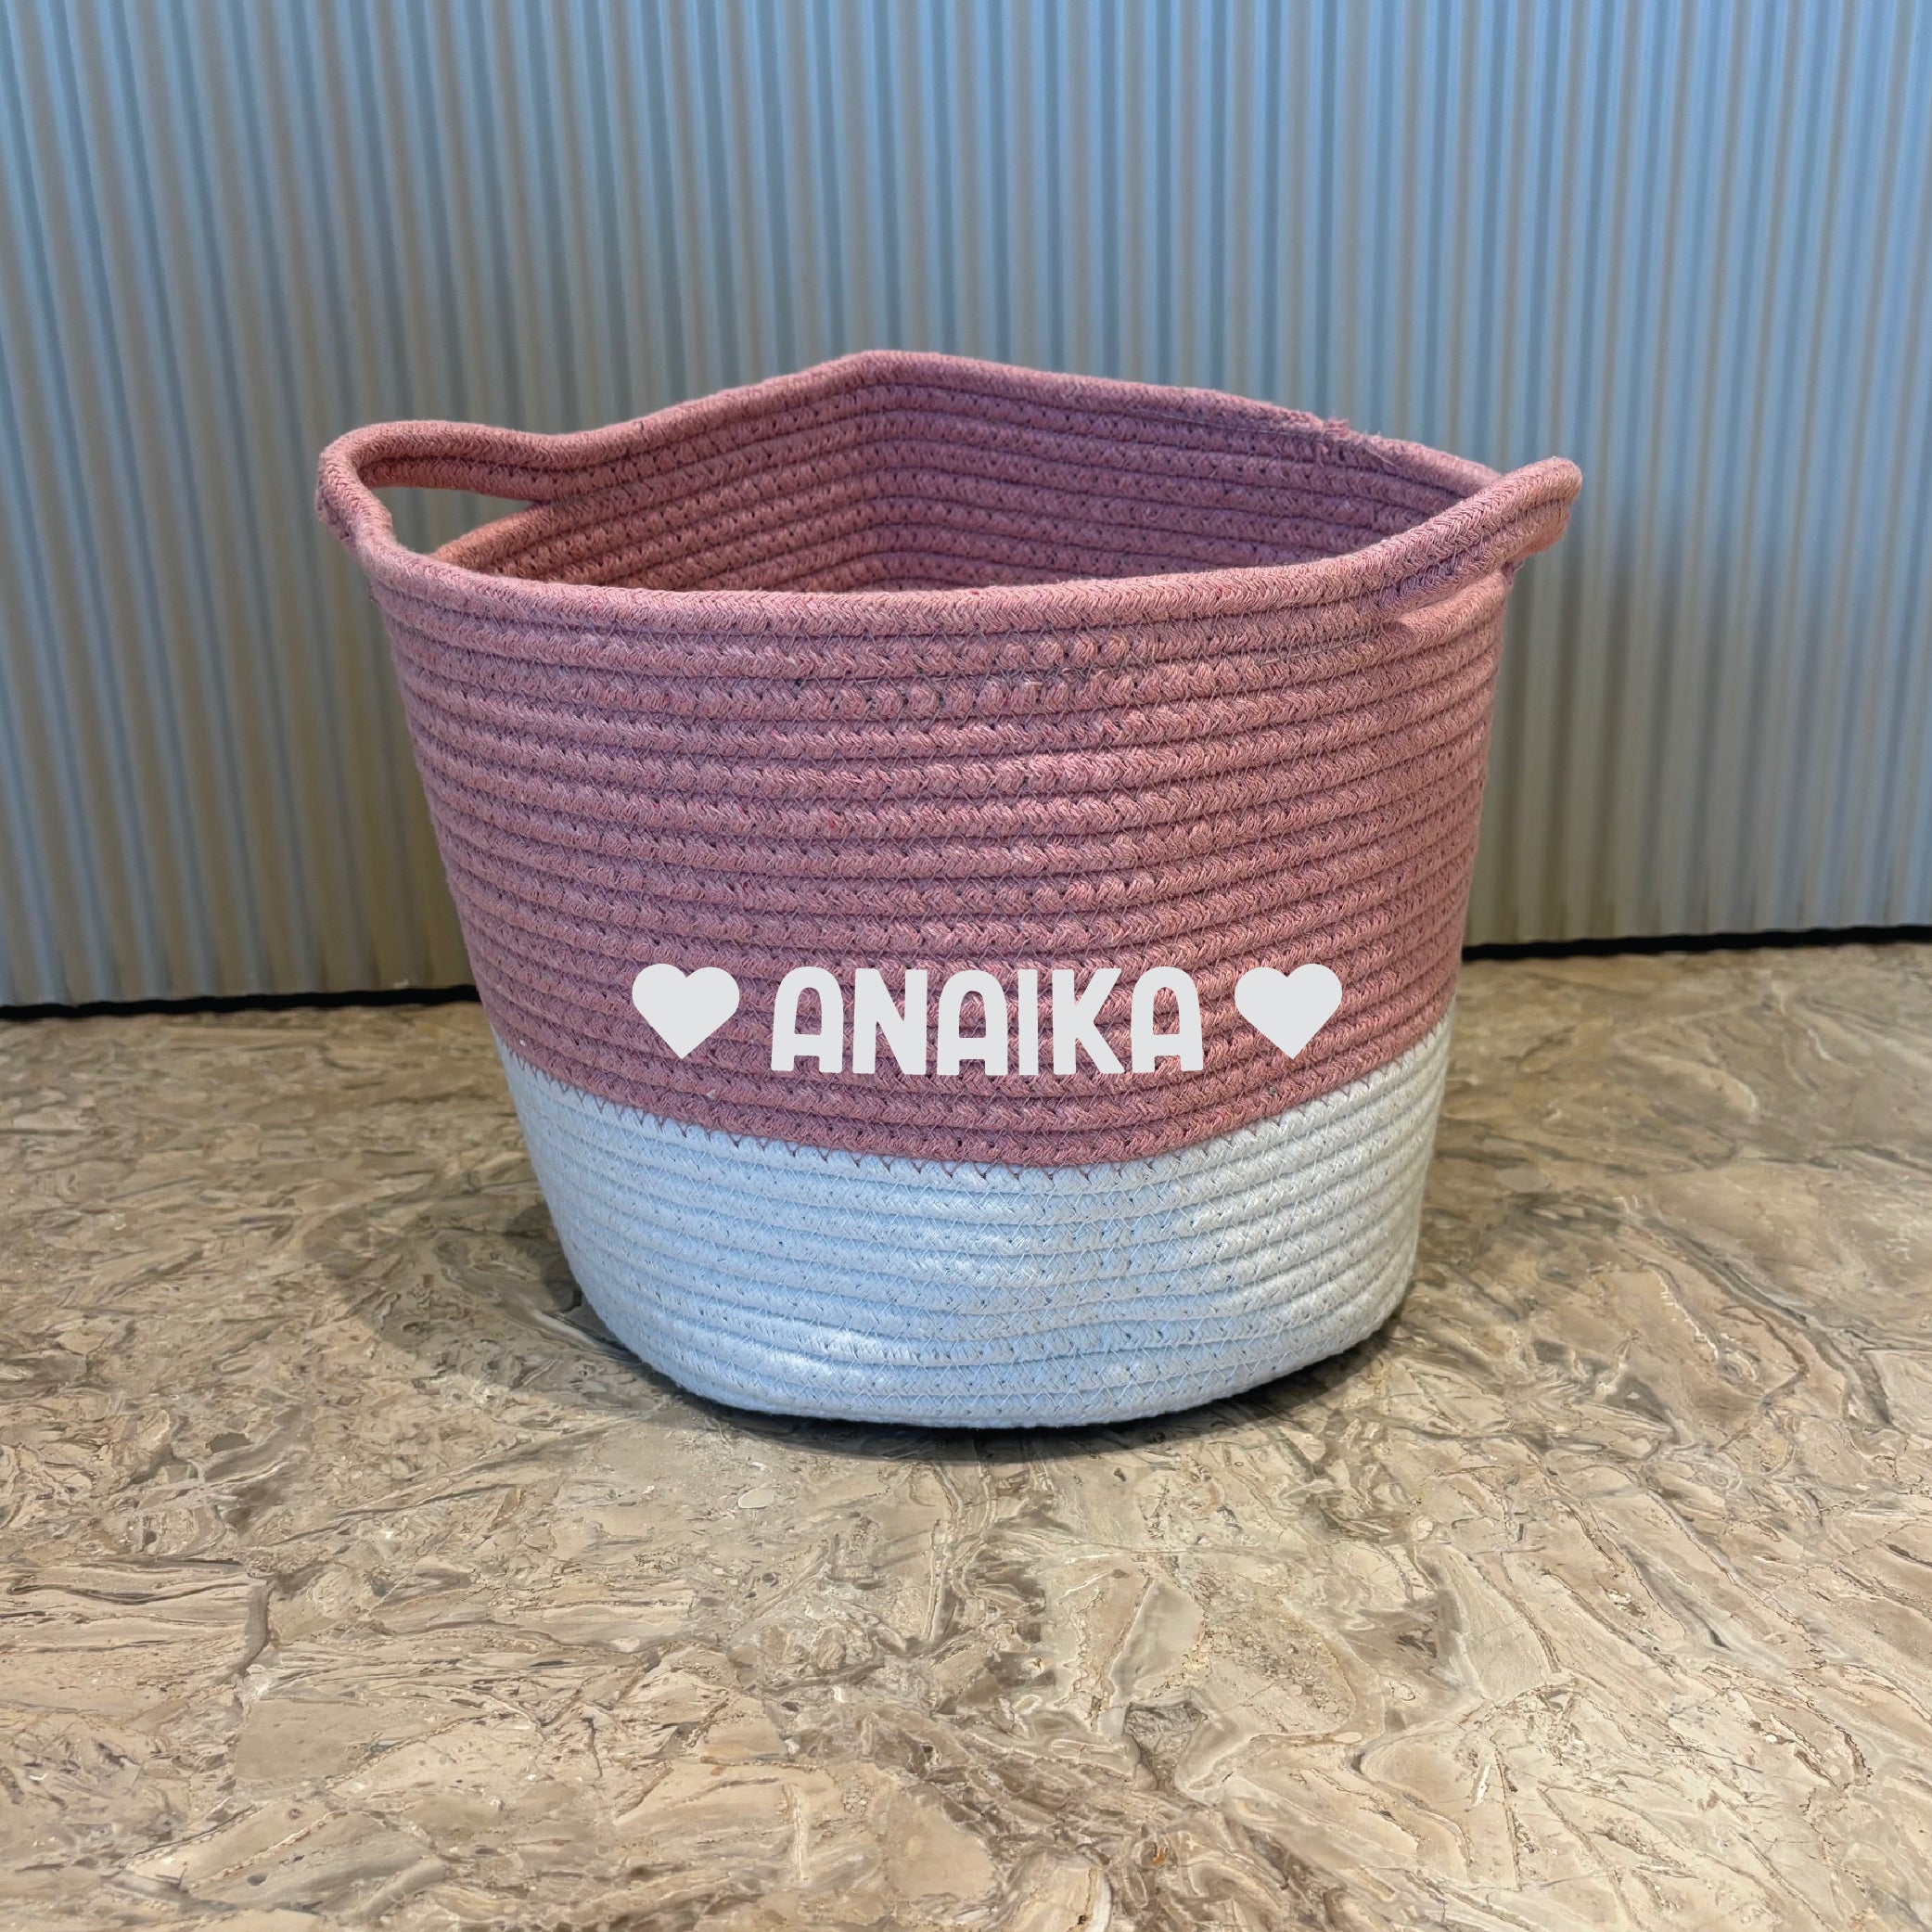 Personalised Storage Basket - Small, Pink <br> CLEARANCE SALE